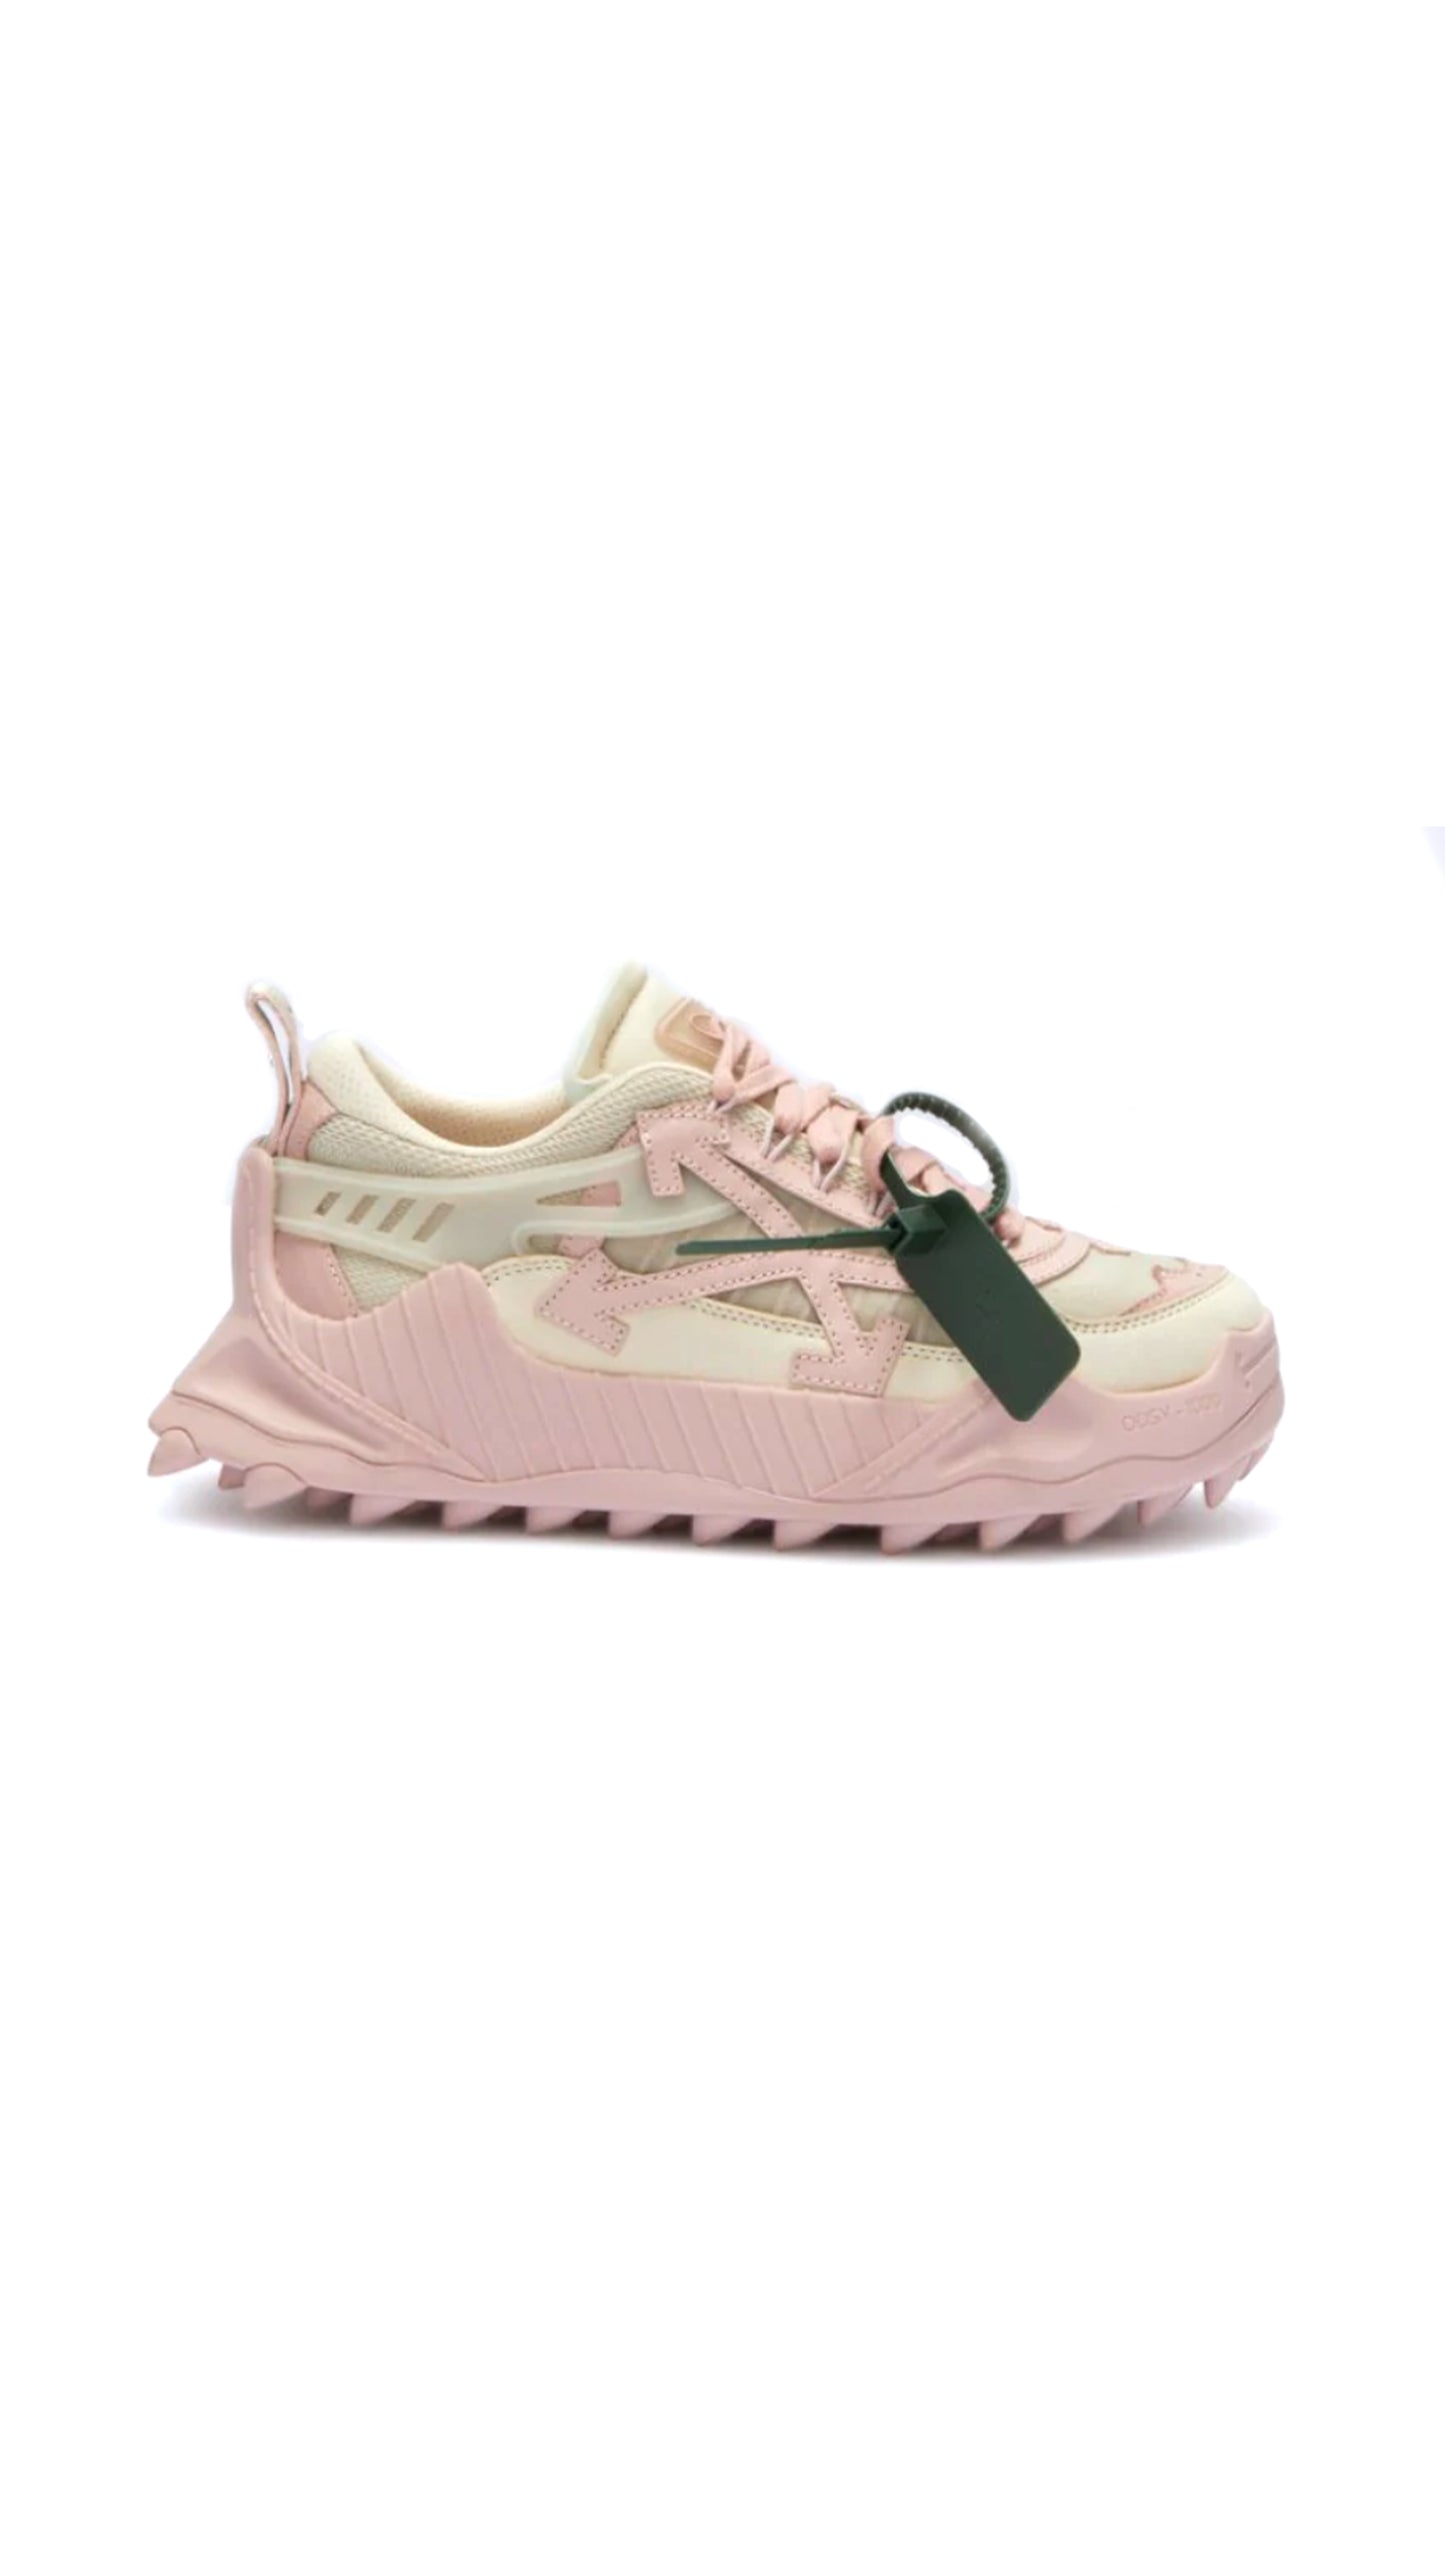 Odsy-1000 Sneakers - Pink / Off-White